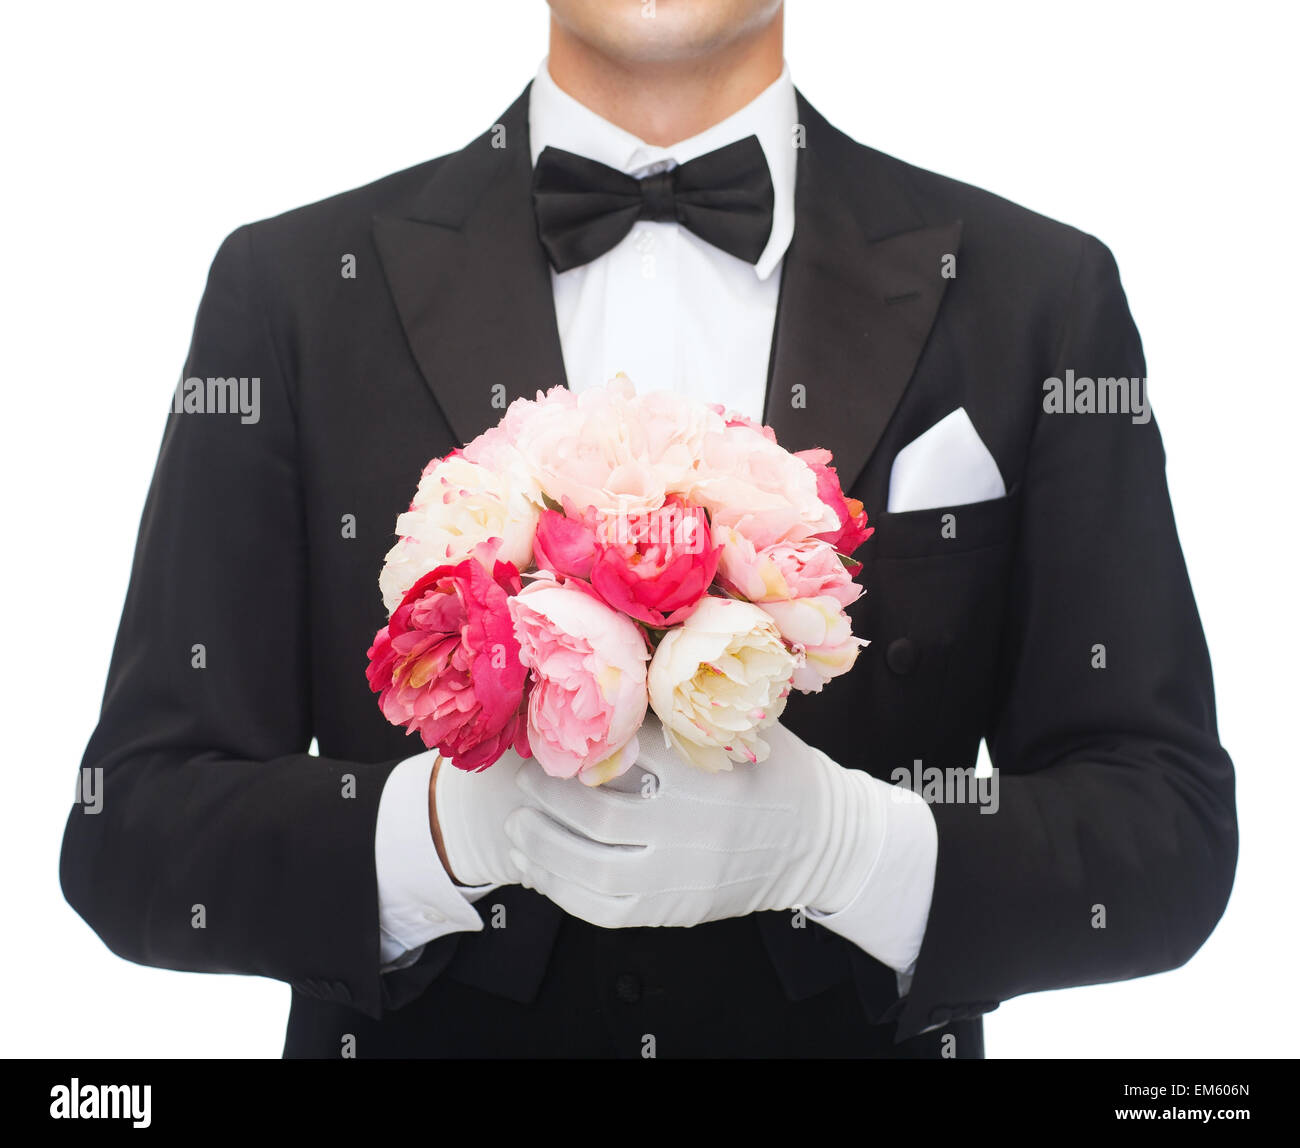 man in tail-coat with flower bouquet Stock Photo